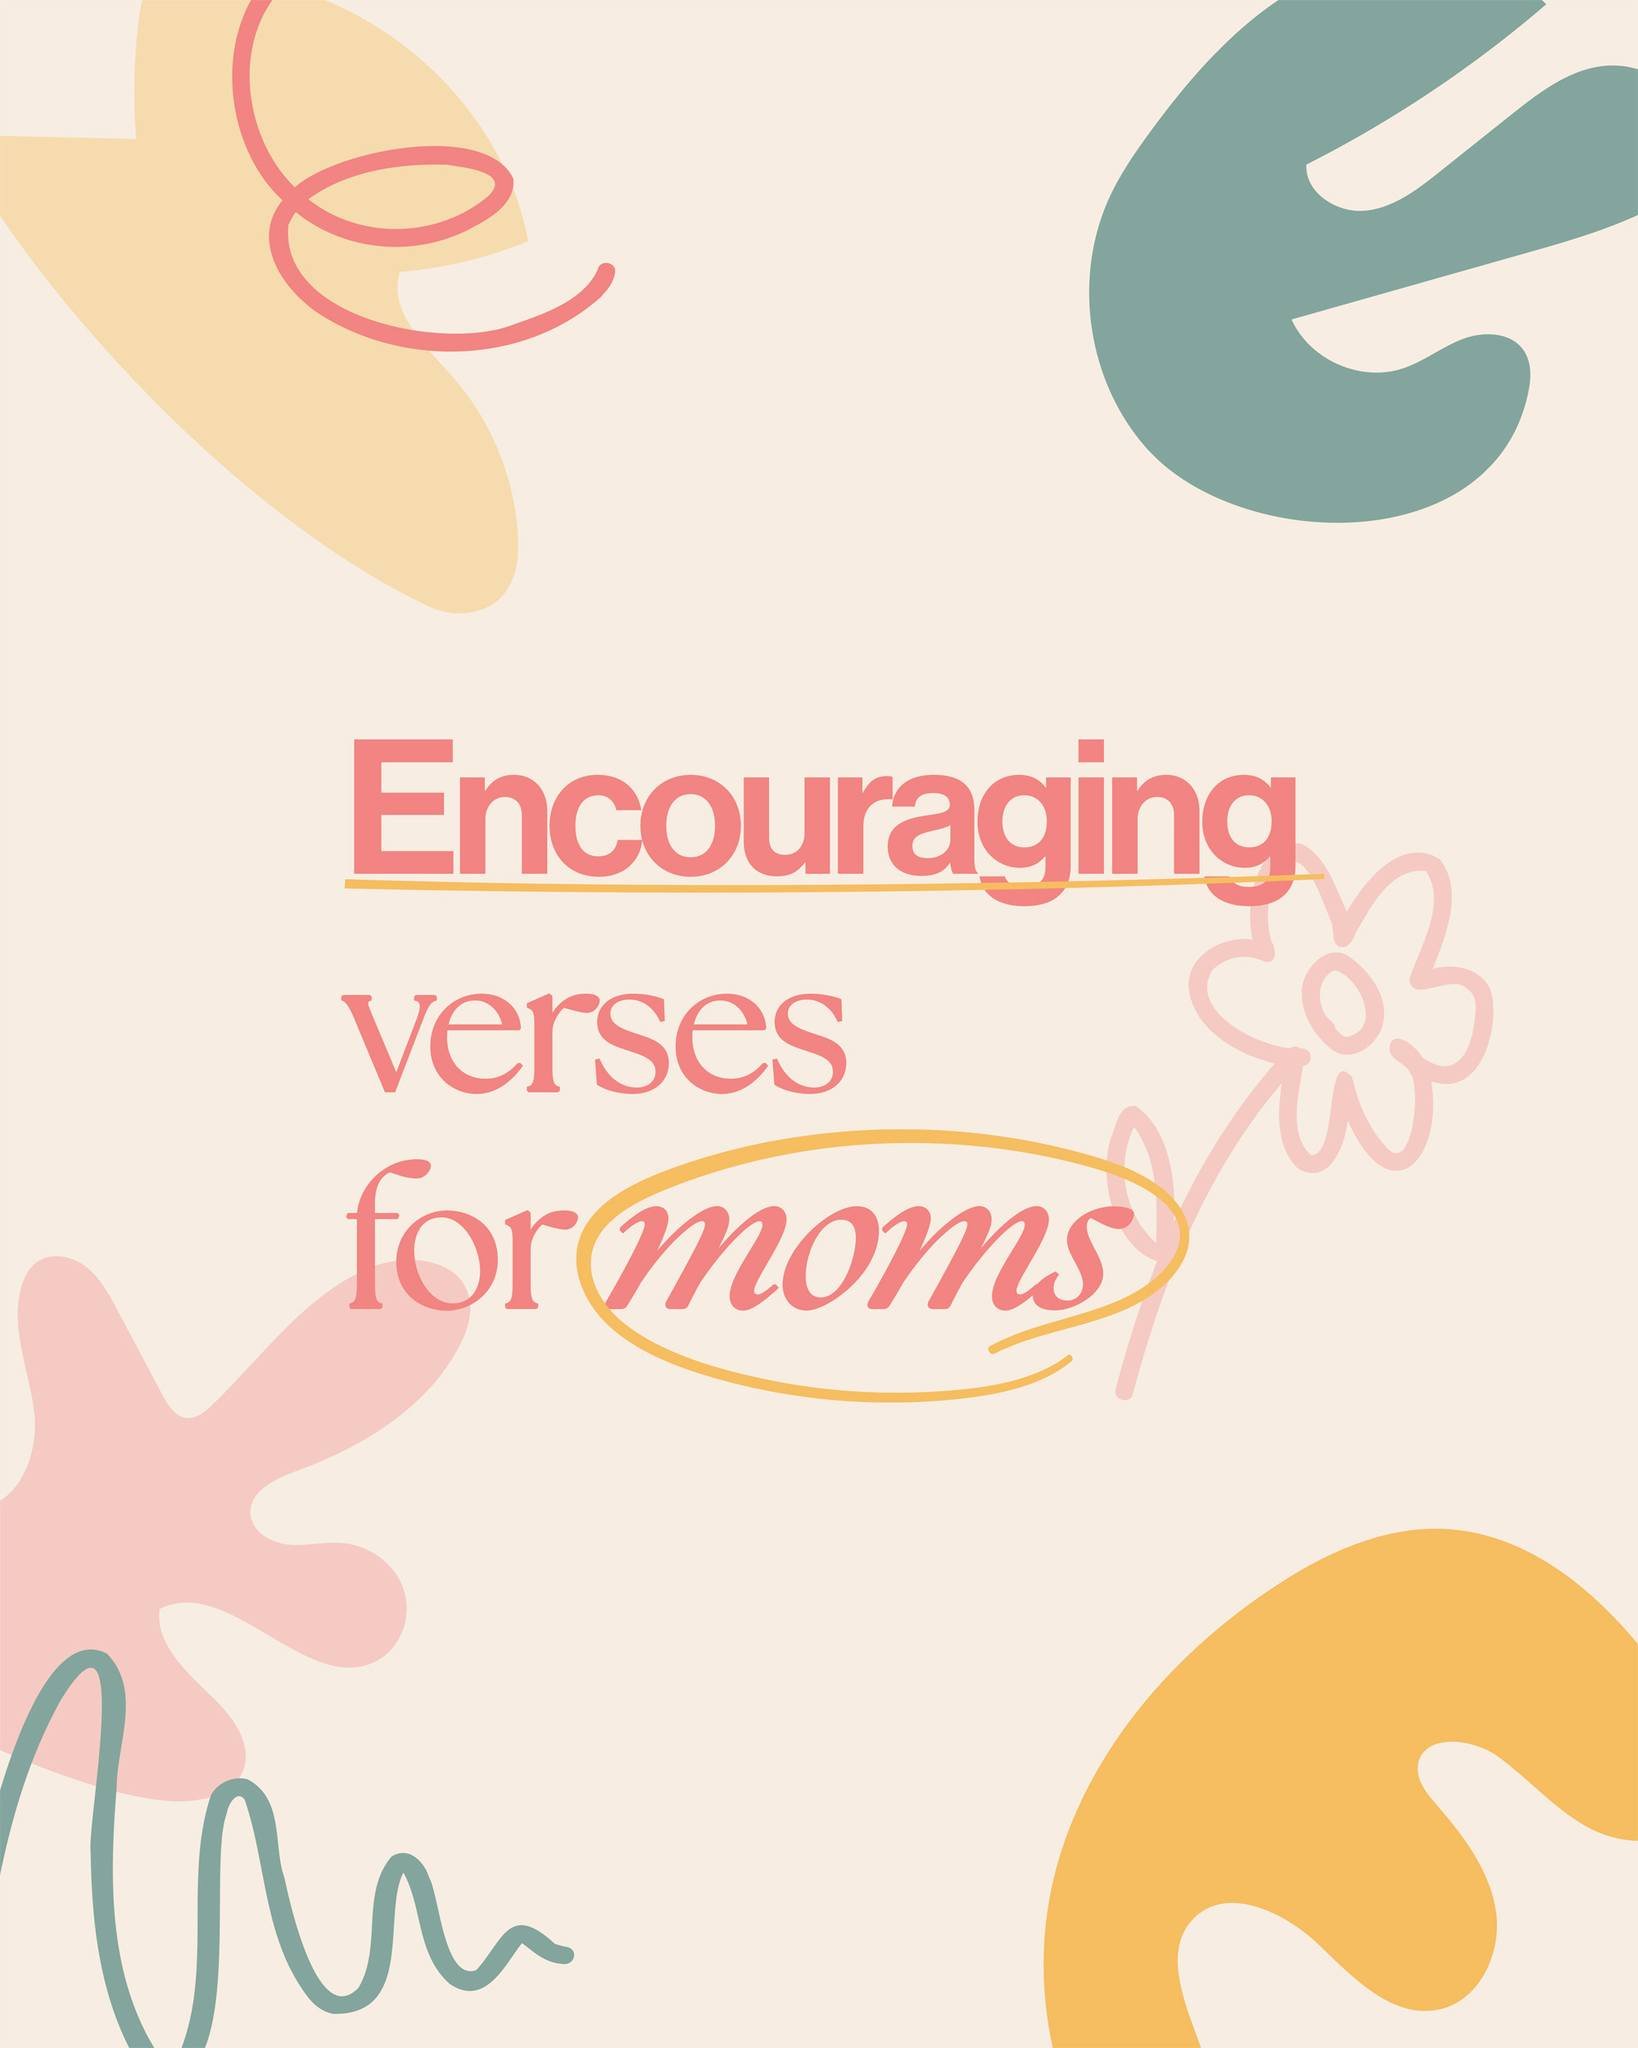 Moms, we want to encourage you! Whatever season you find yourself in, the Word of God is filled with encouragement to meet you where you're at.

🩷 Share this with a mom you want to encourage!